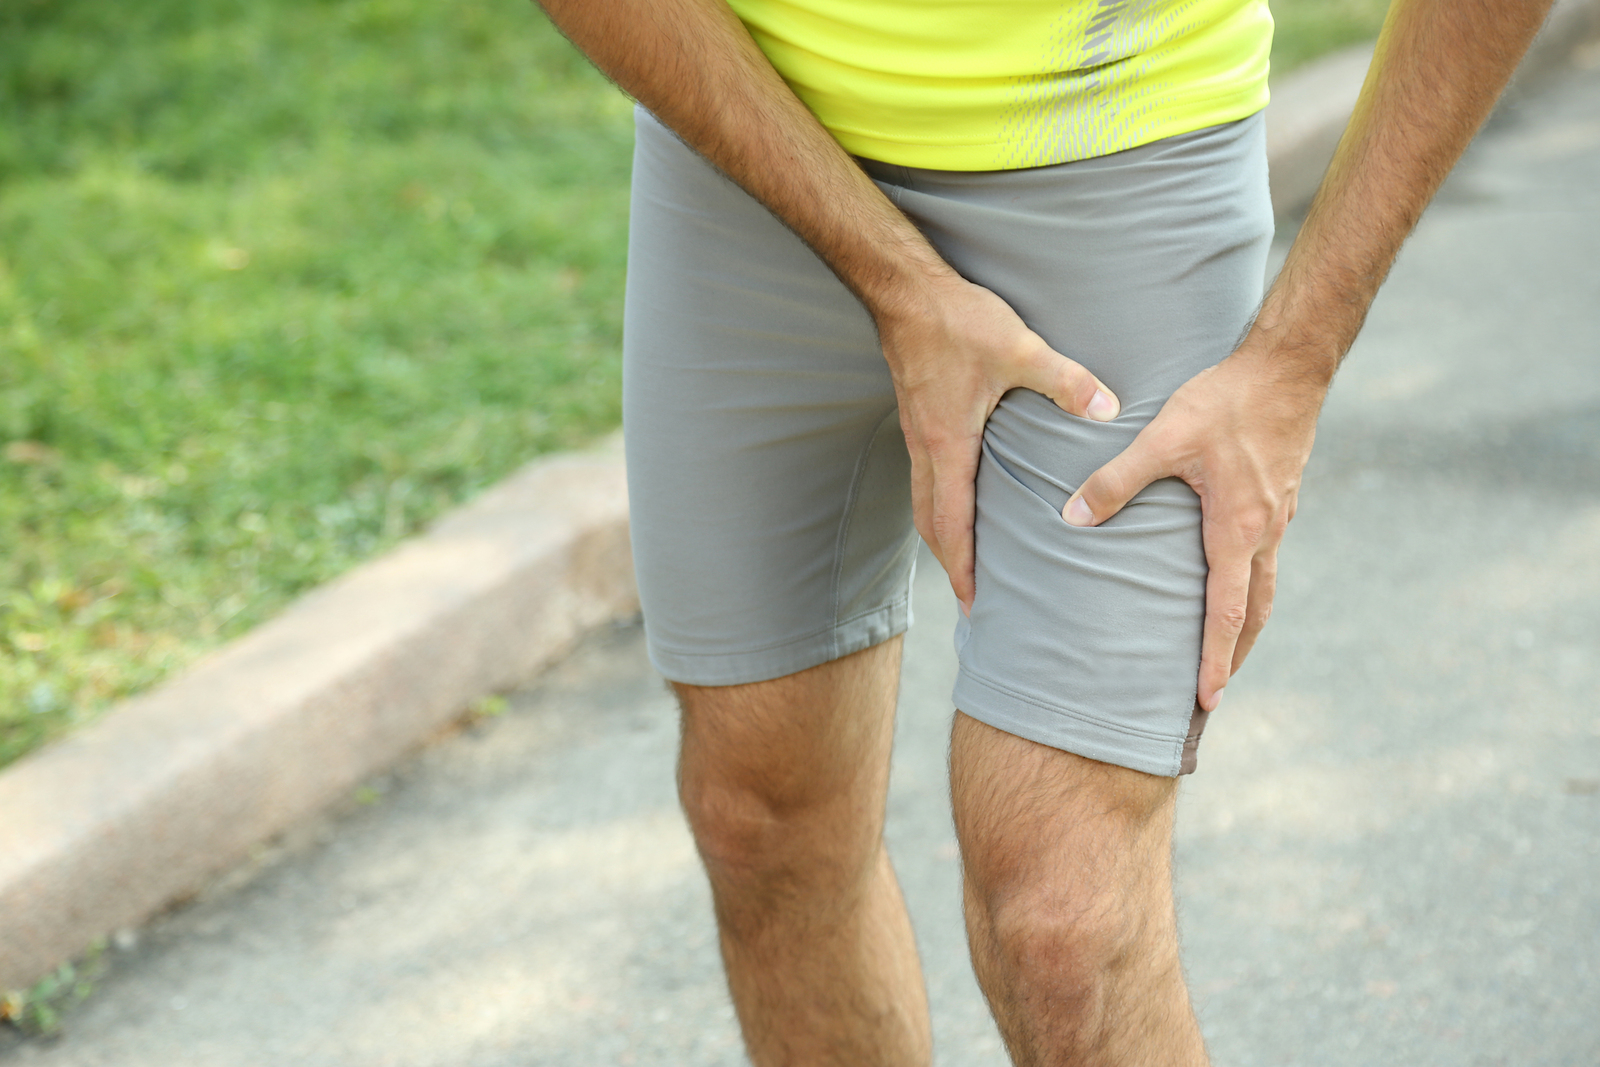 Athletic Injuries, Sprain and Strain